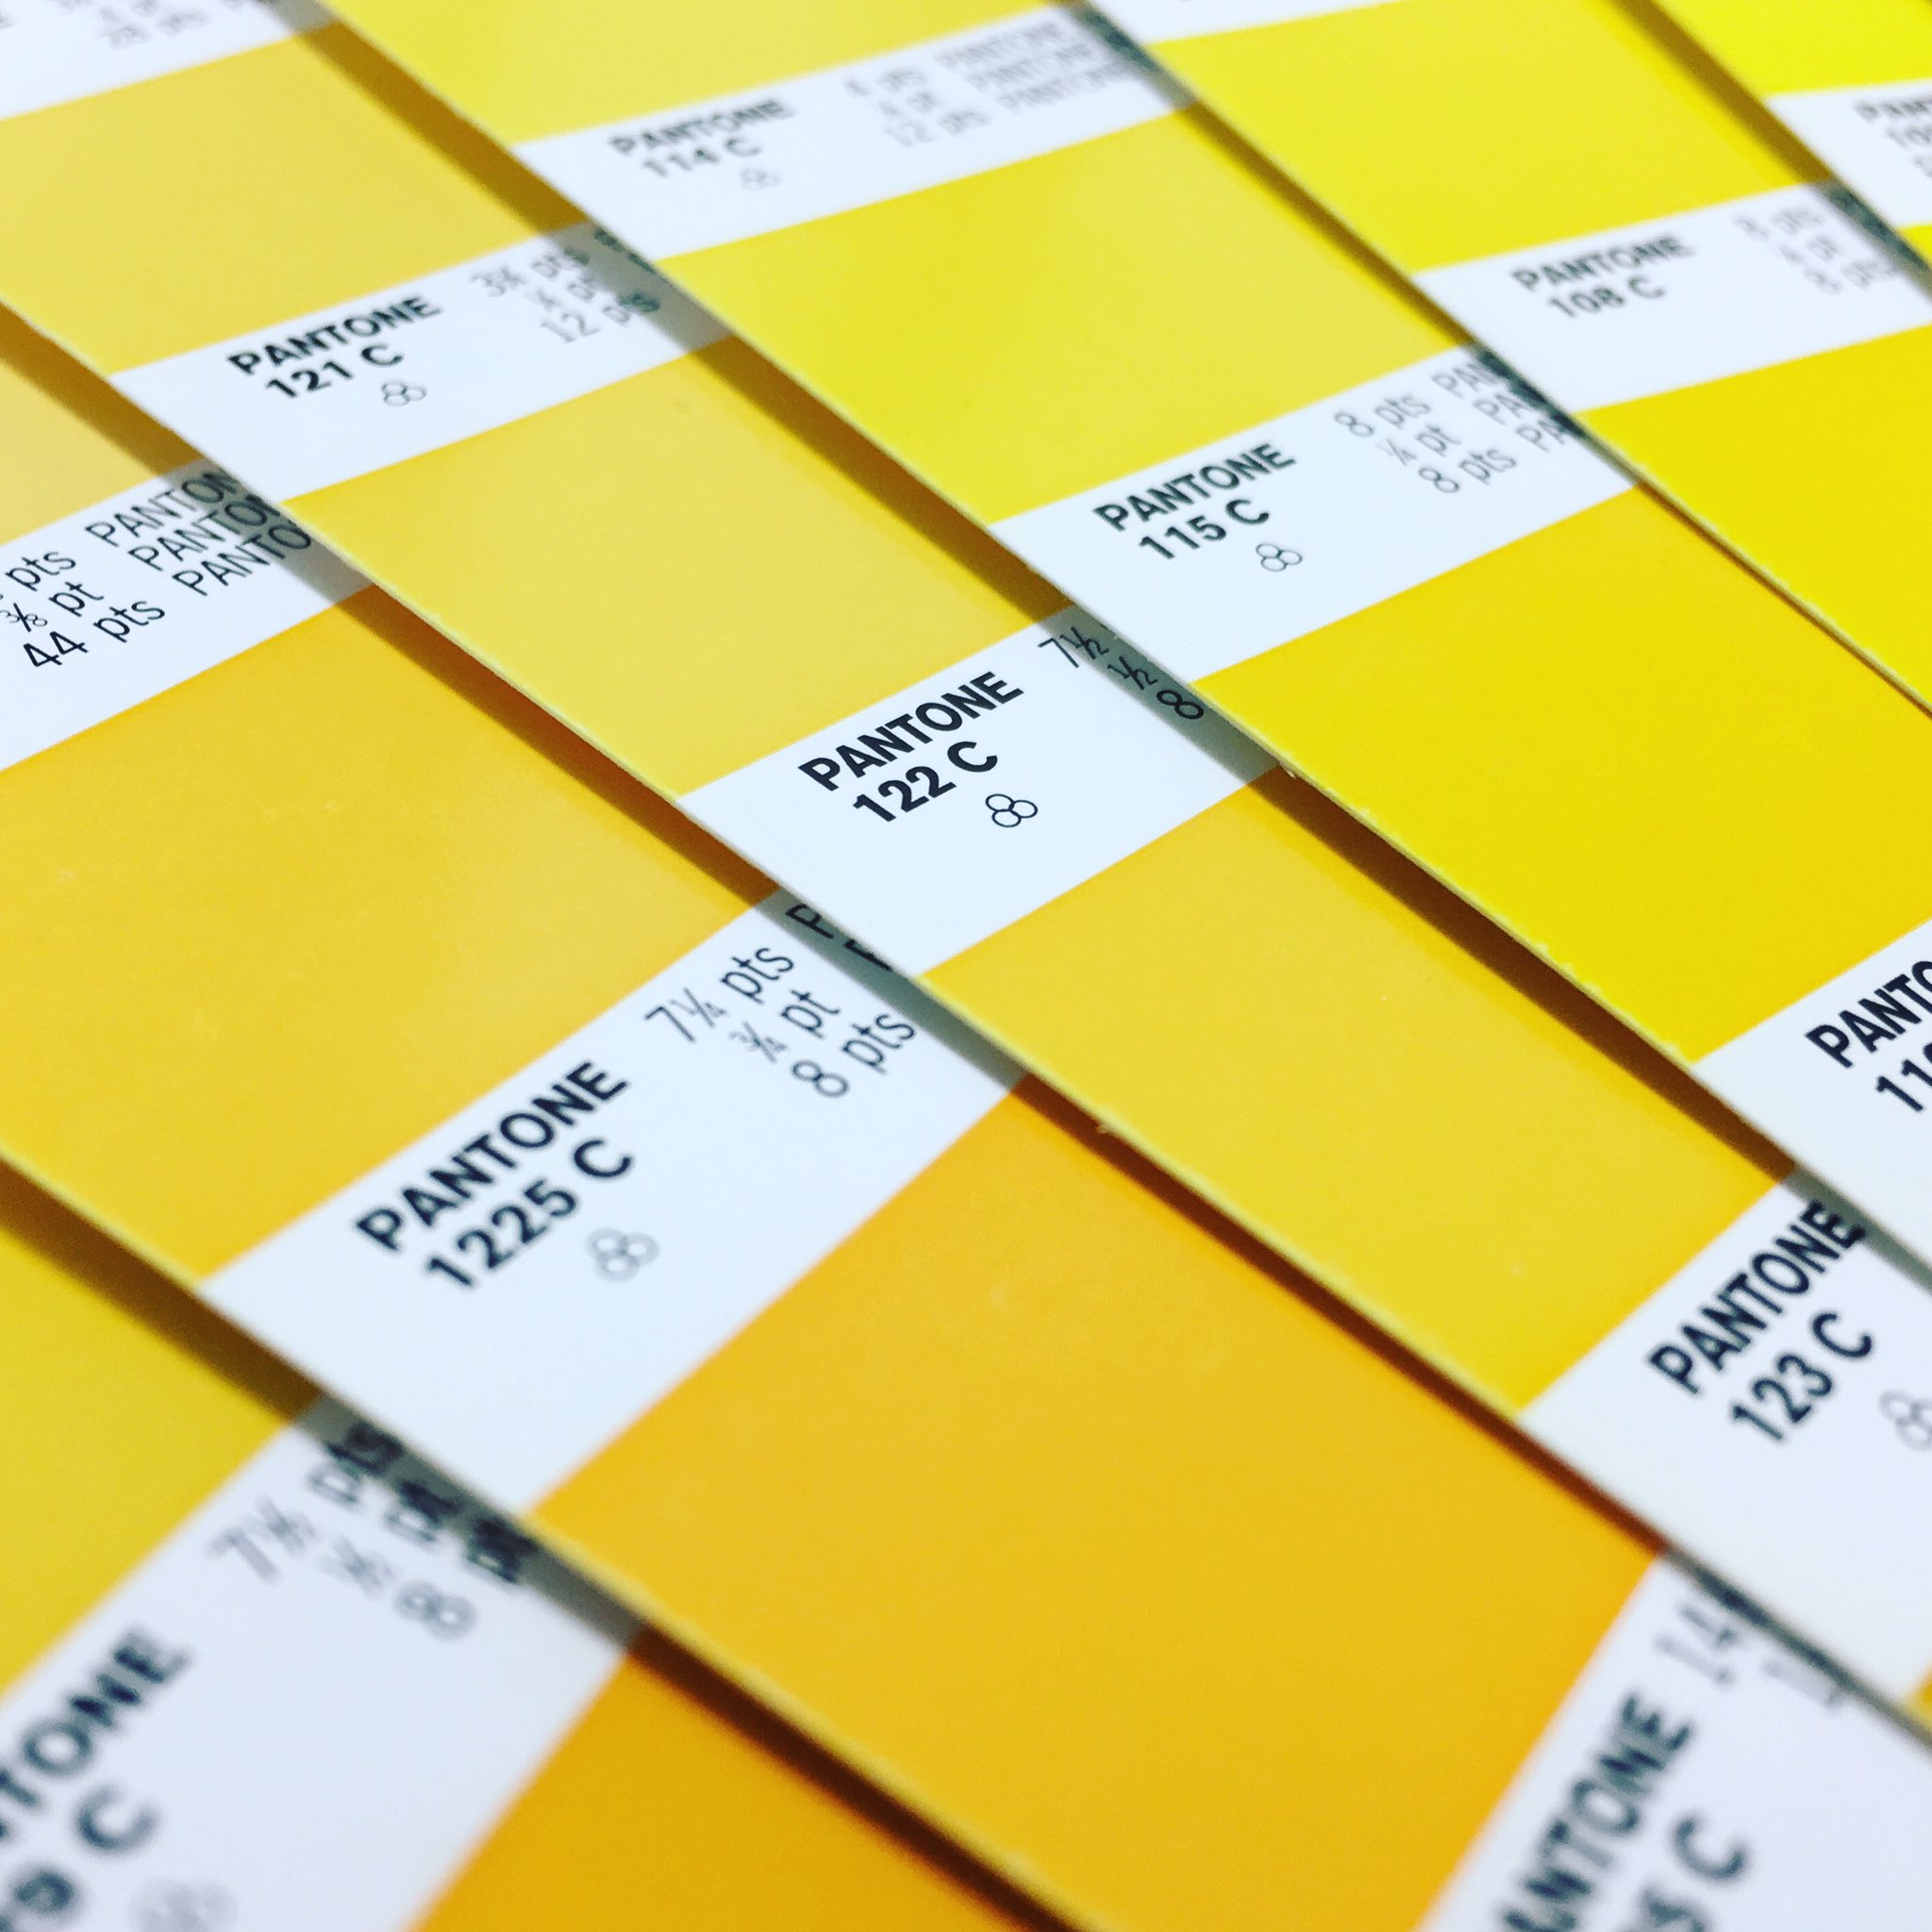 Sarah Jayne Hickman on Twitter: "It's all about the yellows this morning  @mhpdesigngroup #yellow #pantone #pantonecolor #colour #branding  #martinhopkins https://t.co/73pPxZ7KjR" / Twitter